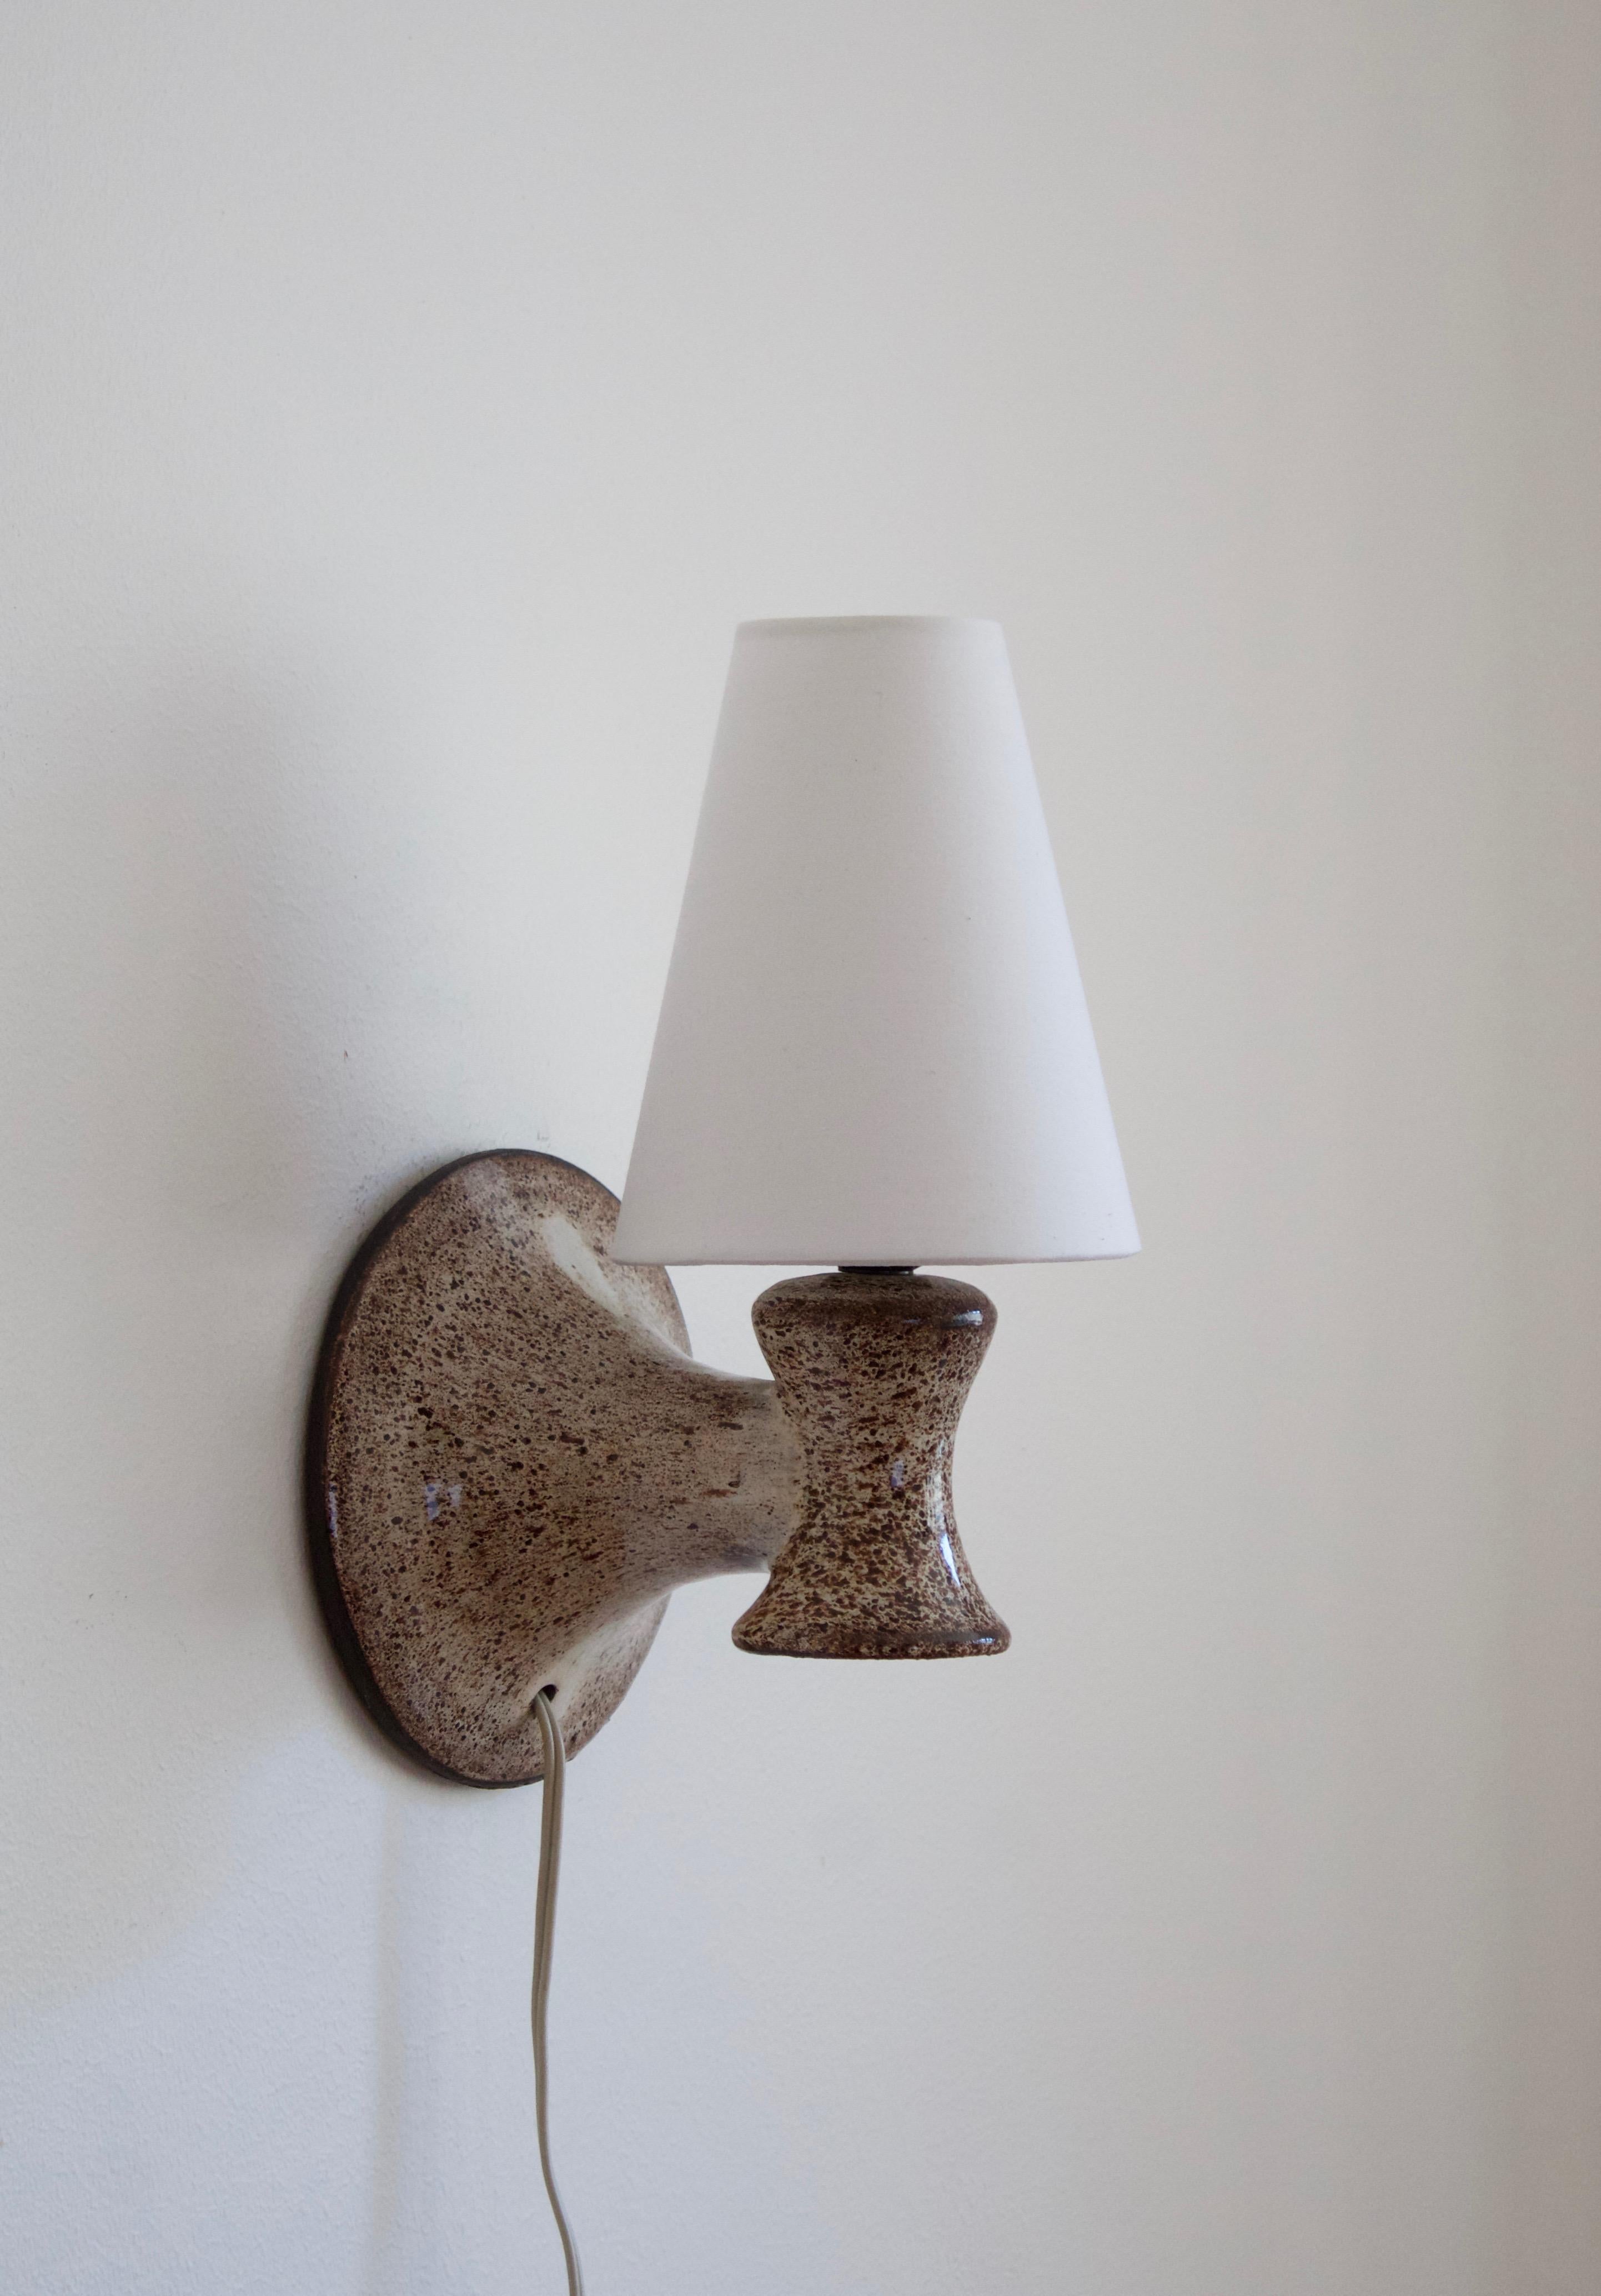 A wall light / sconce. Designed and produced in Denmark, c. 1960s. In glazed stoneware. Brand new fabric lampshade.

Stated dimensions include the lampshade attached.